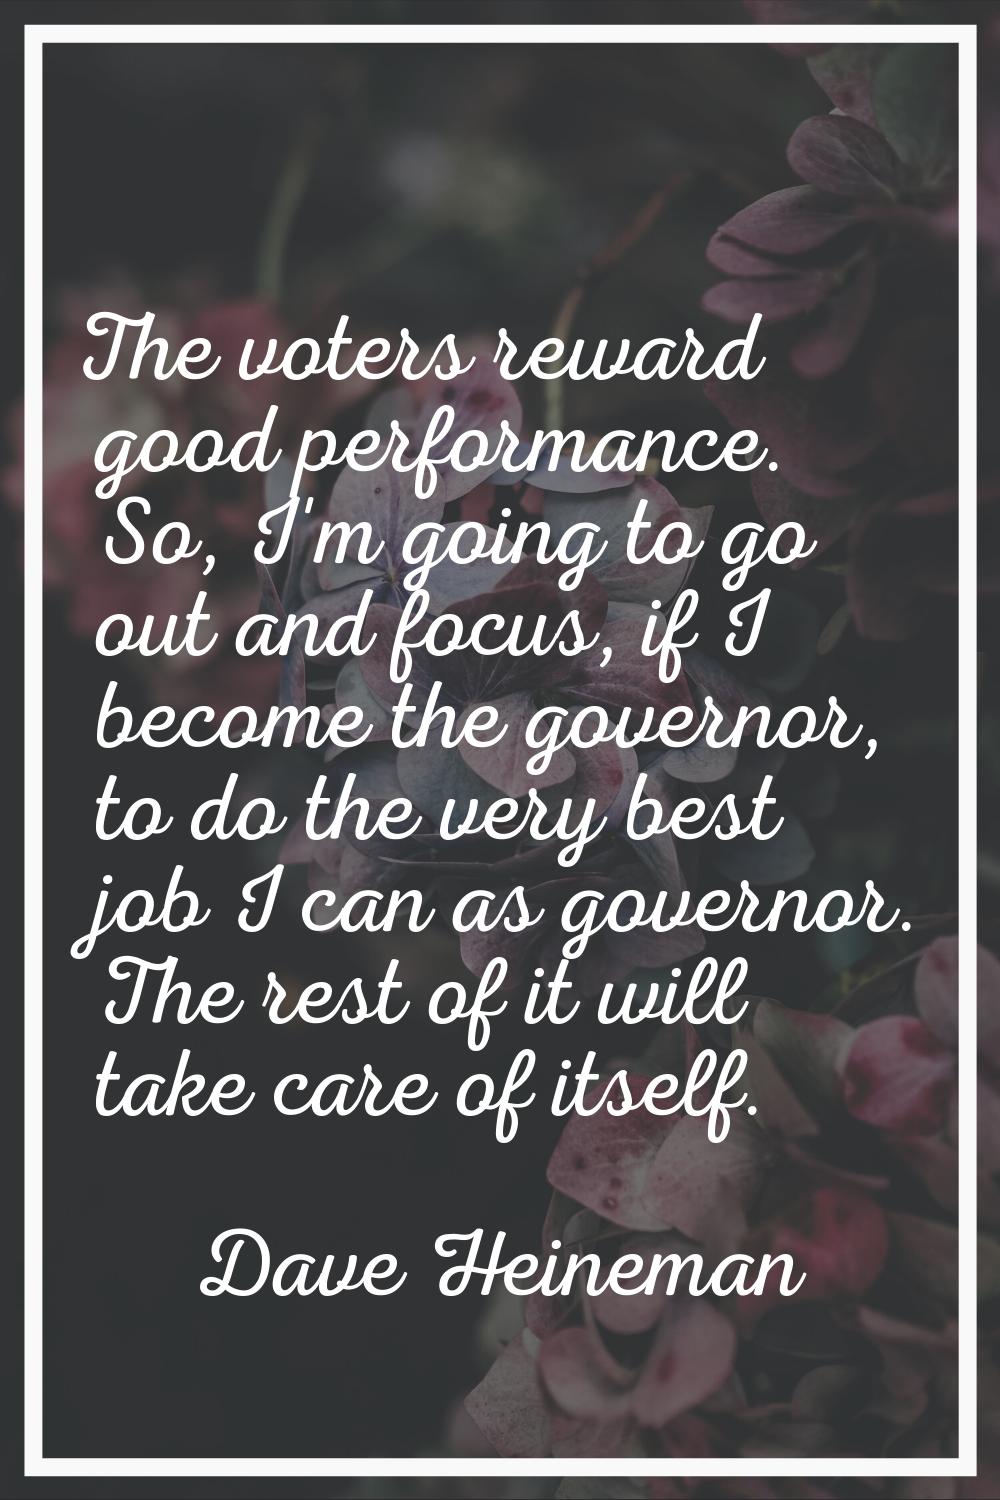 The voters reward good performance. So, I'm going to go out and focus, if I become the governor, to